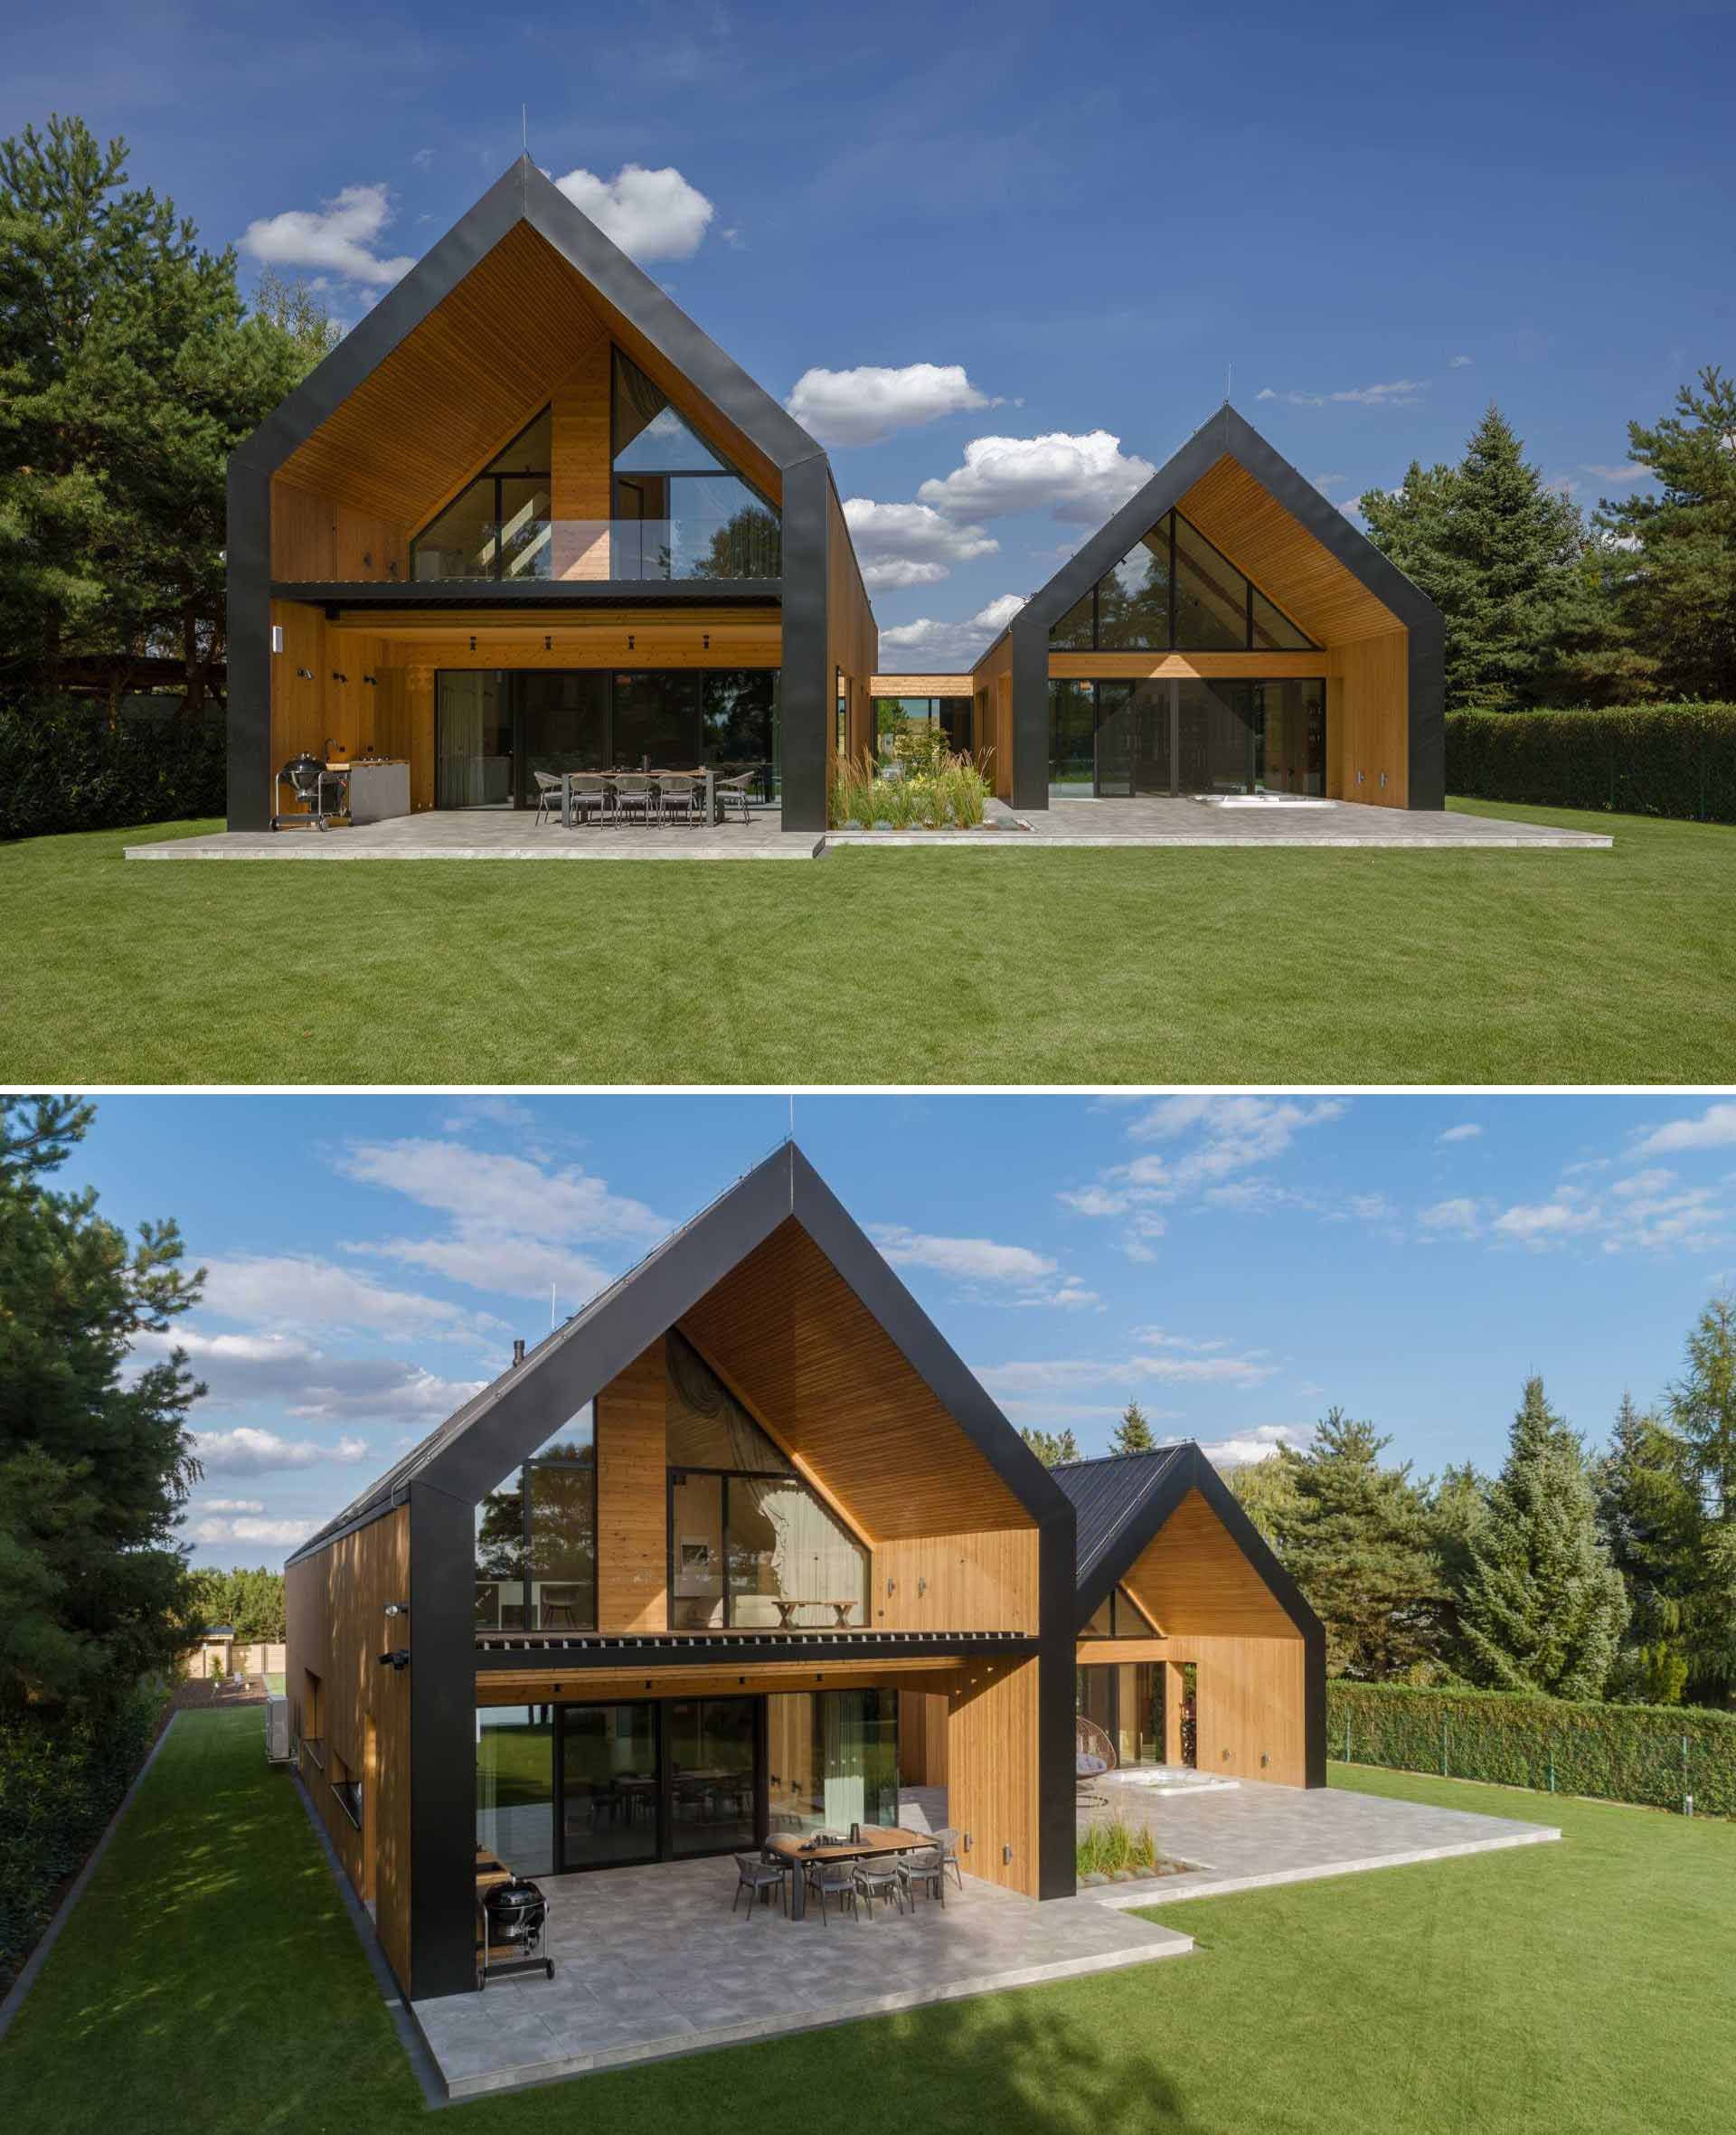 A modern house that has a layout similar to two barns positioned side-by-side.